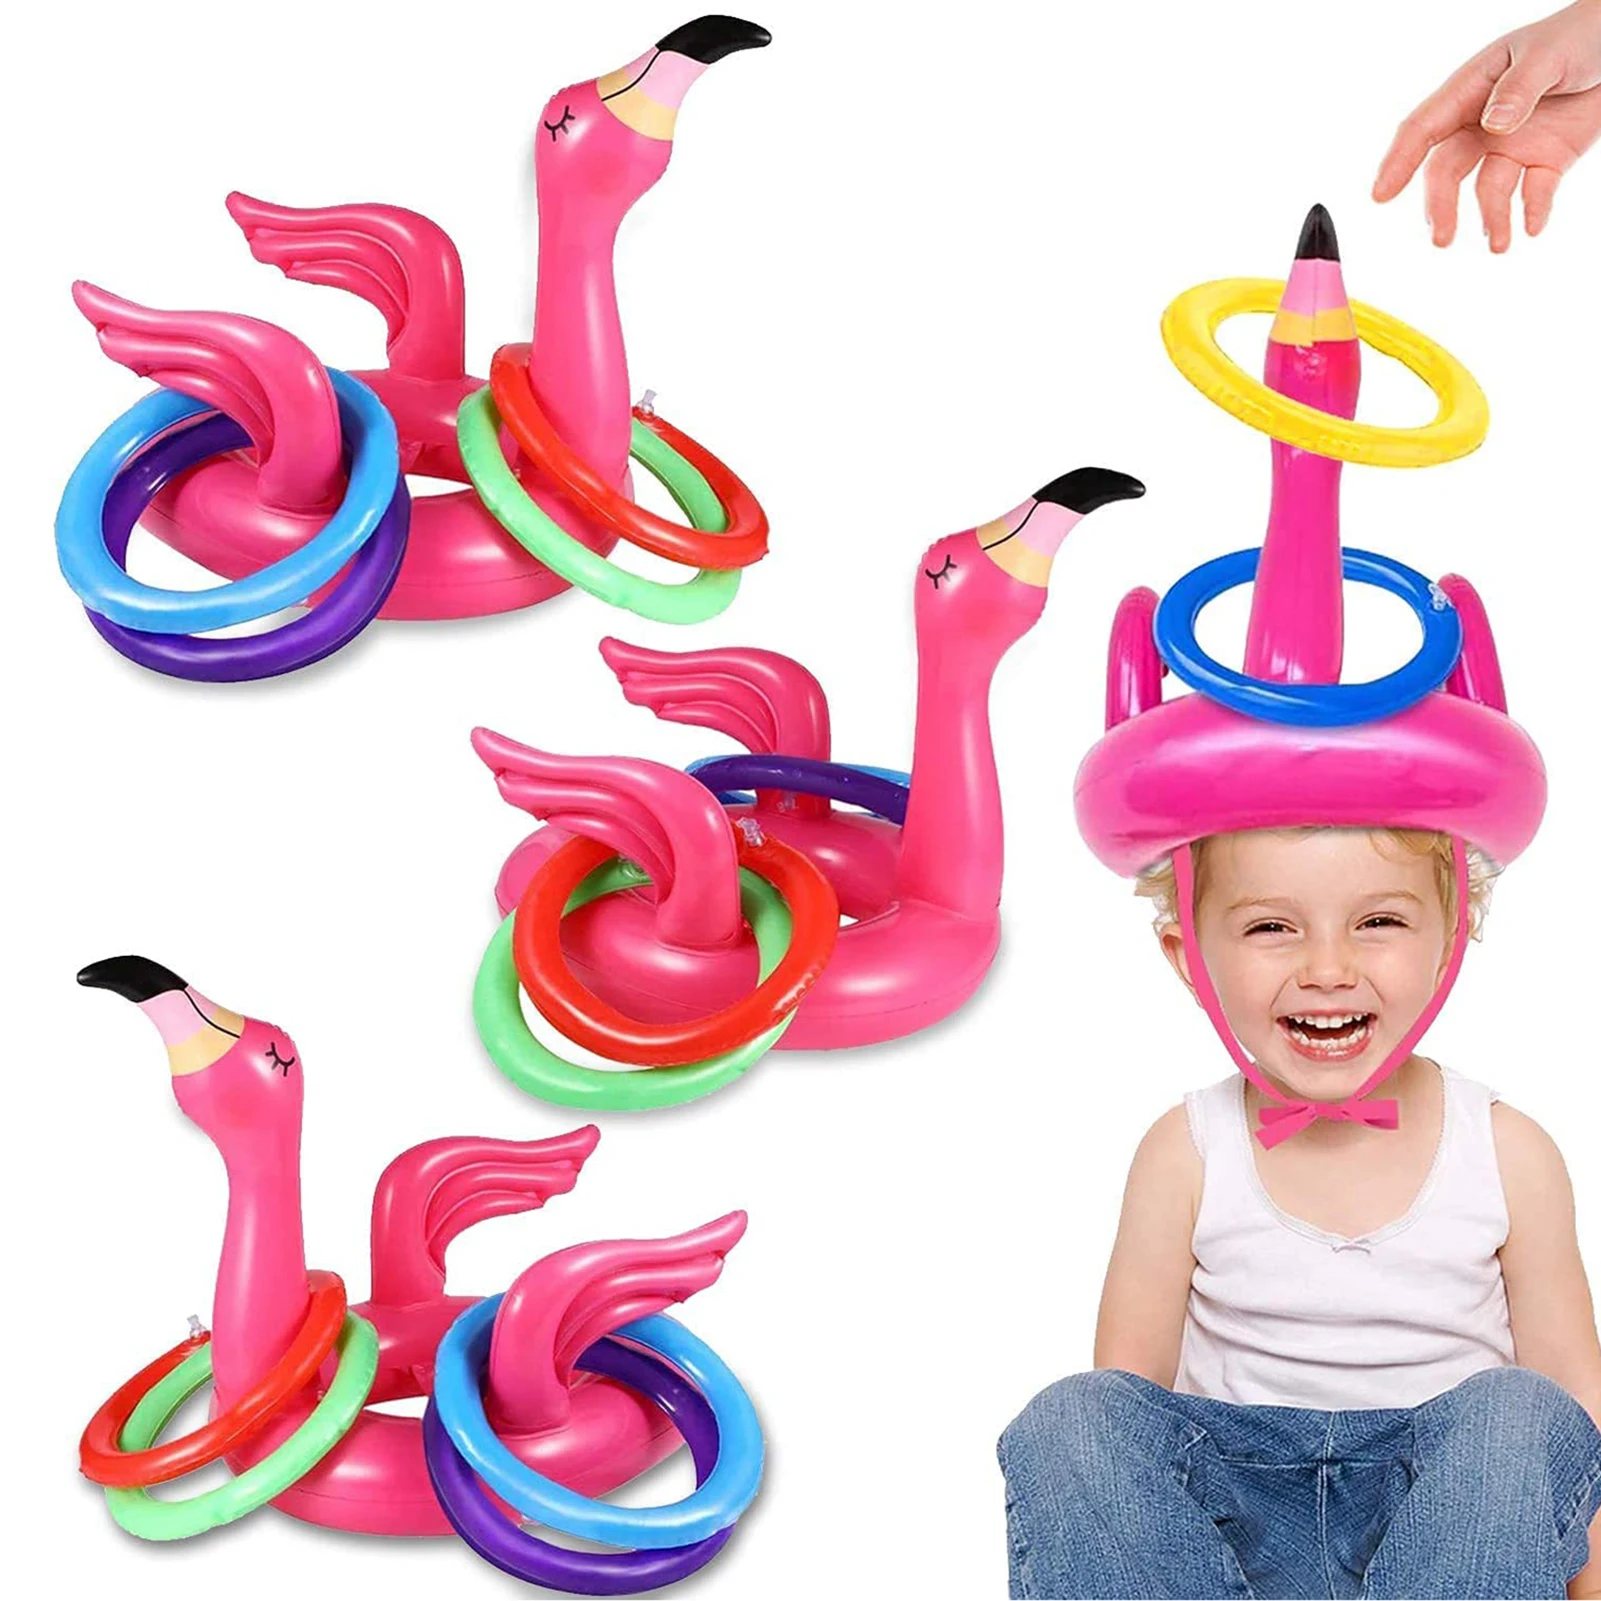 Portable Iatable Flamingo Head Hat With 4Pcs Toss Rings Water Game For Family Party Pink PVC Material Outdoor Pools Fun Toys soft frisbee outdoor family interaction professional hand throwing boomerang children s play toys gift garden beach party games